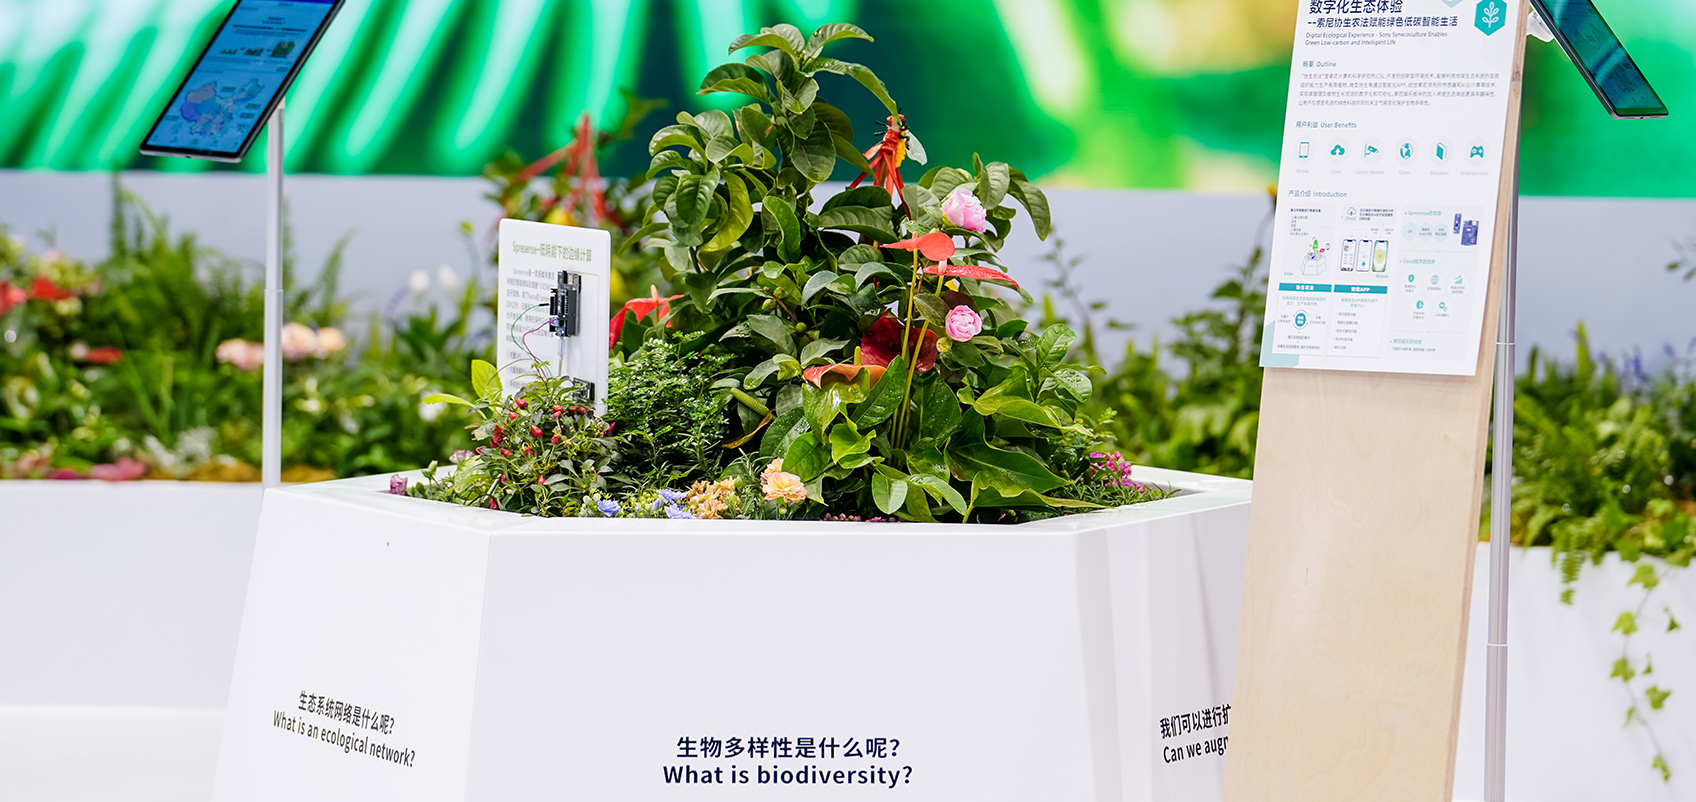 Photo of plants at the Sony booth at the expo.